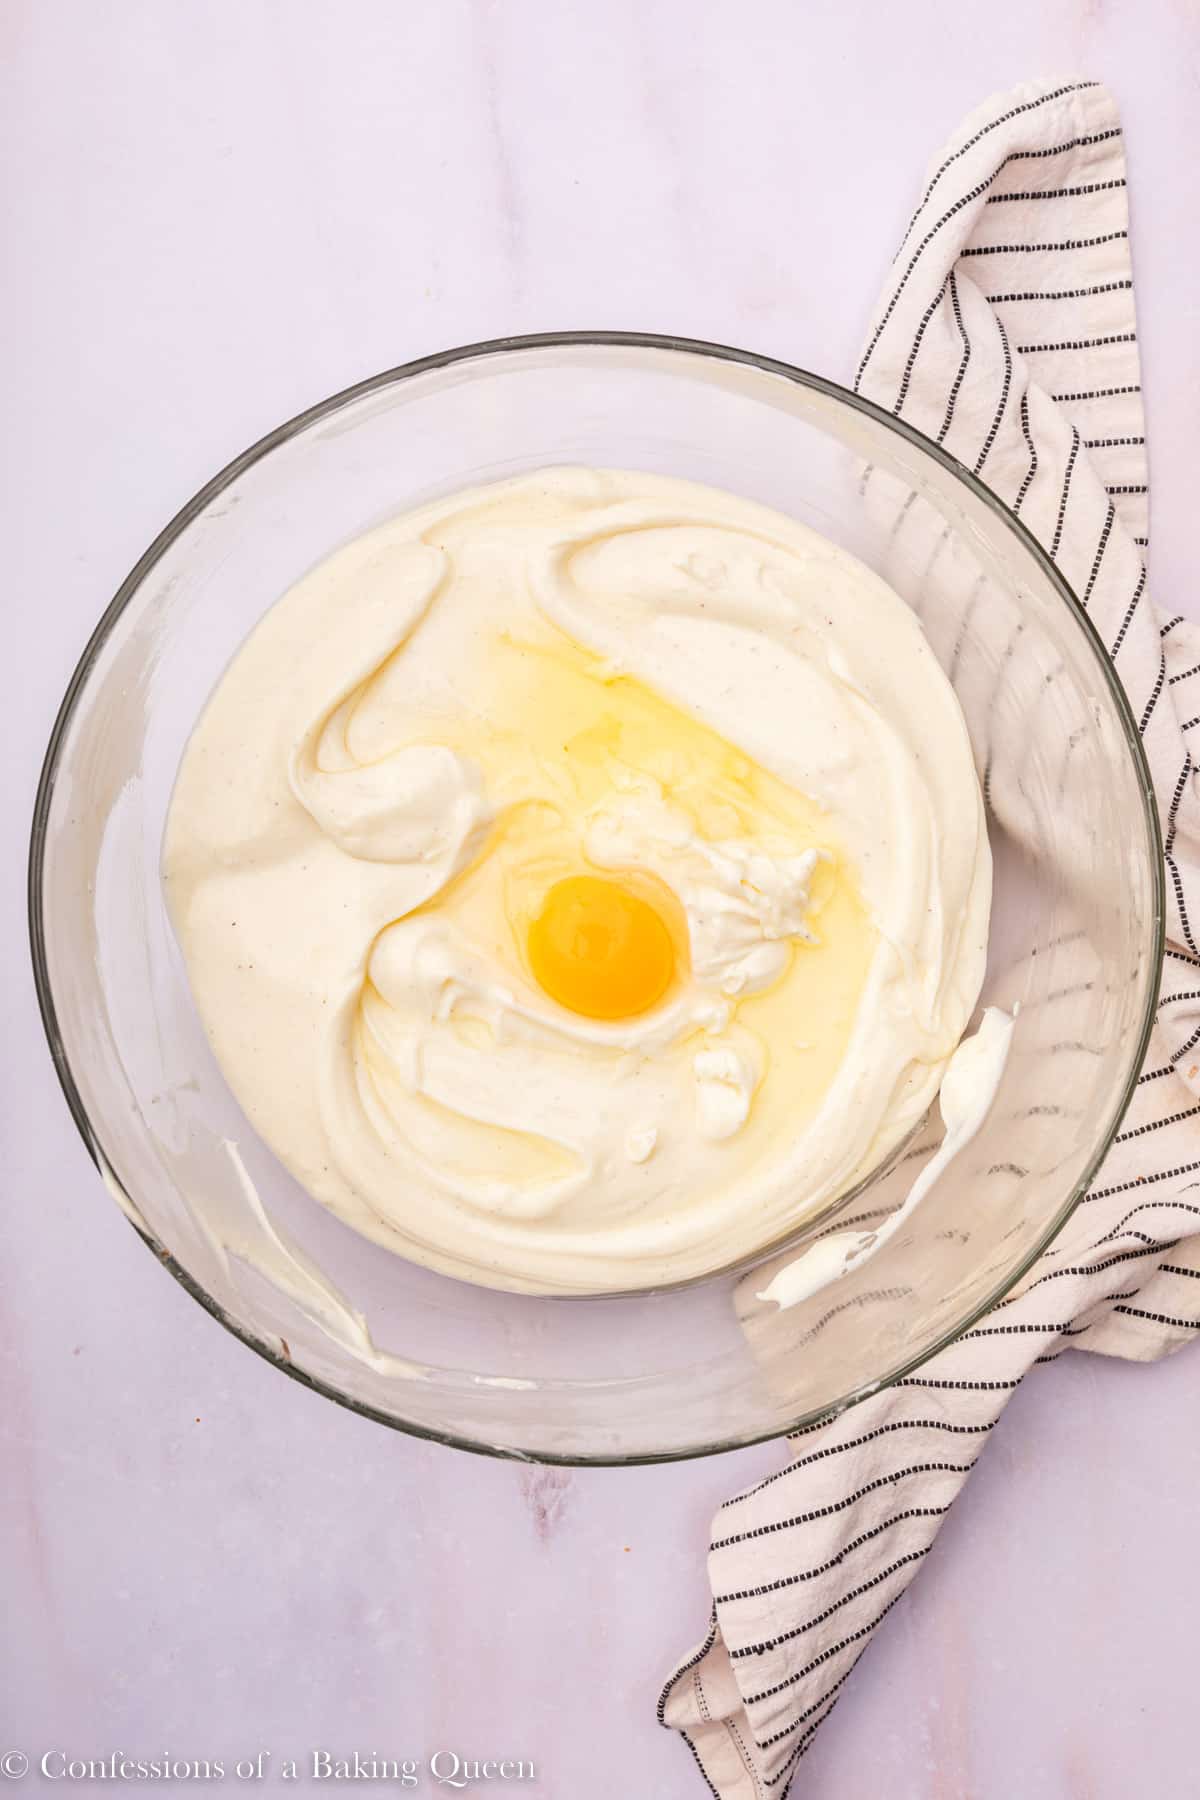 eggs added one at a time to cheesecake batter in glass bowl on a light marble surface with a stripped linen